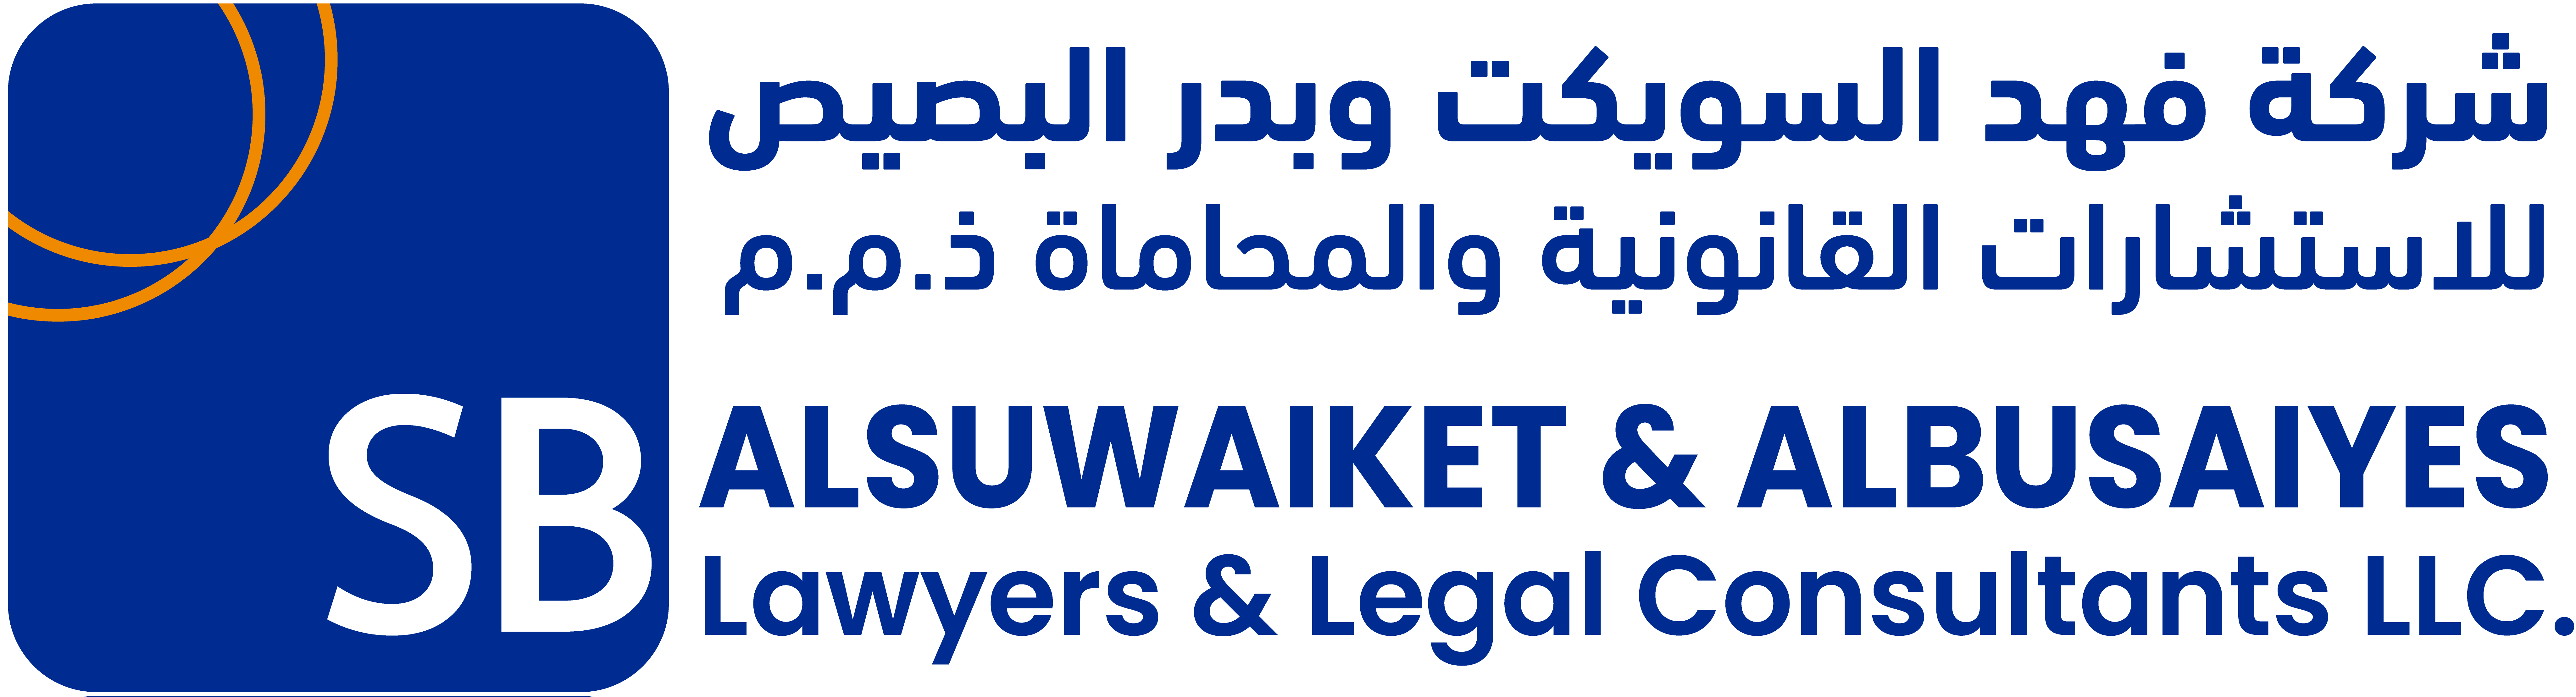 AlSuwaiket & AlBusaiyes Lawyers and Legal Consultants LLC.